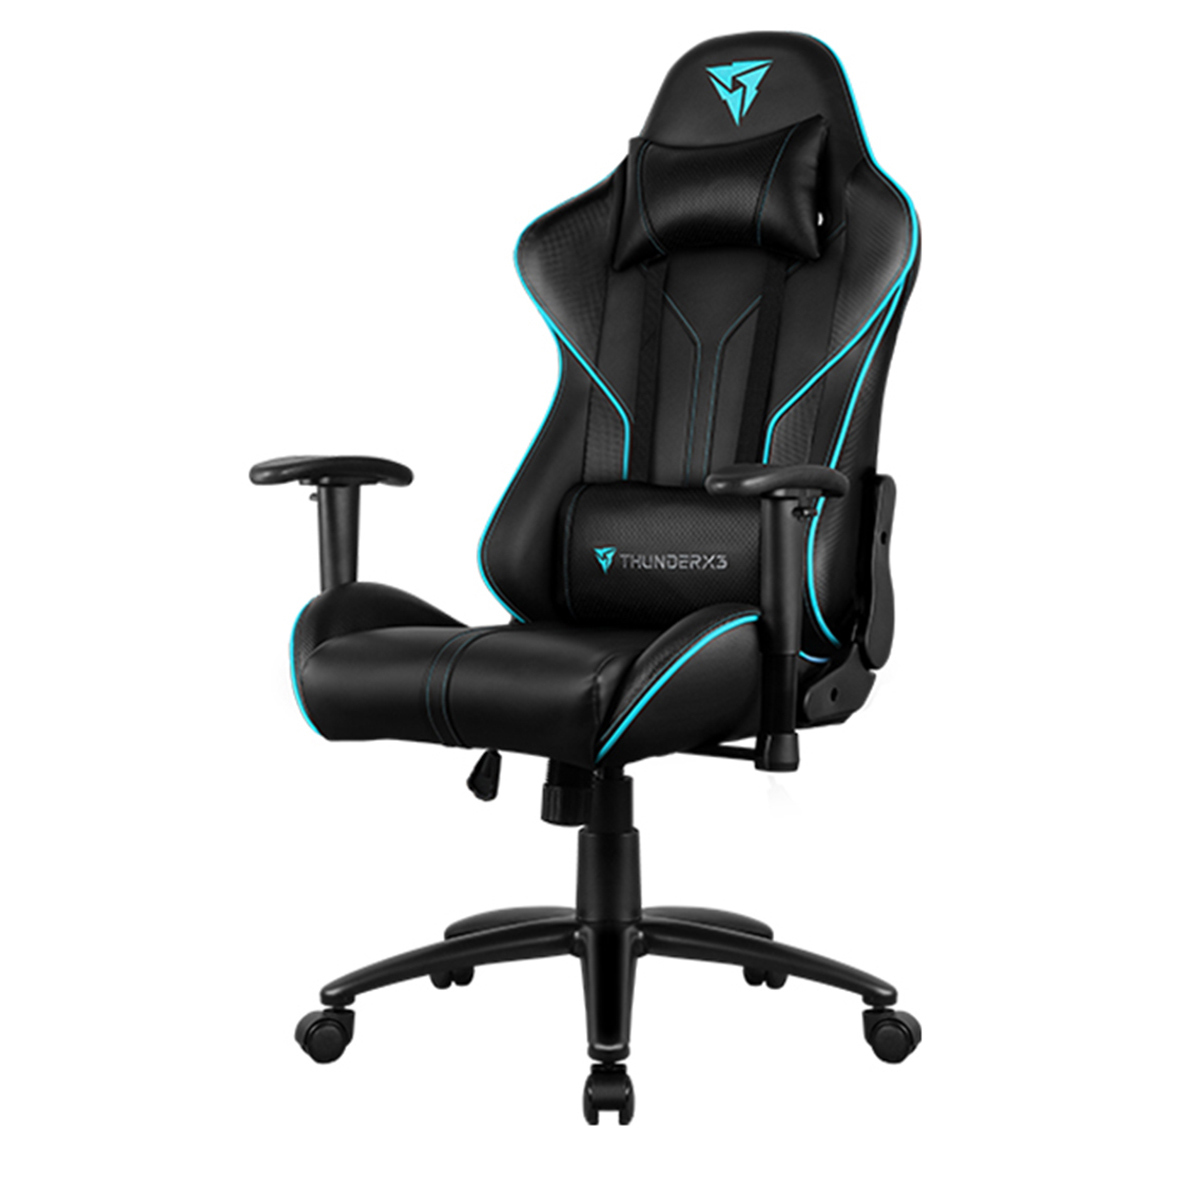  ThunderX3 RC3 Gaming /Office Chair - Black/Cyan<BR><fONT COLOR='RED'>In-Store Pickup Not Available - Delivery Only (Freight Charges Apply)  